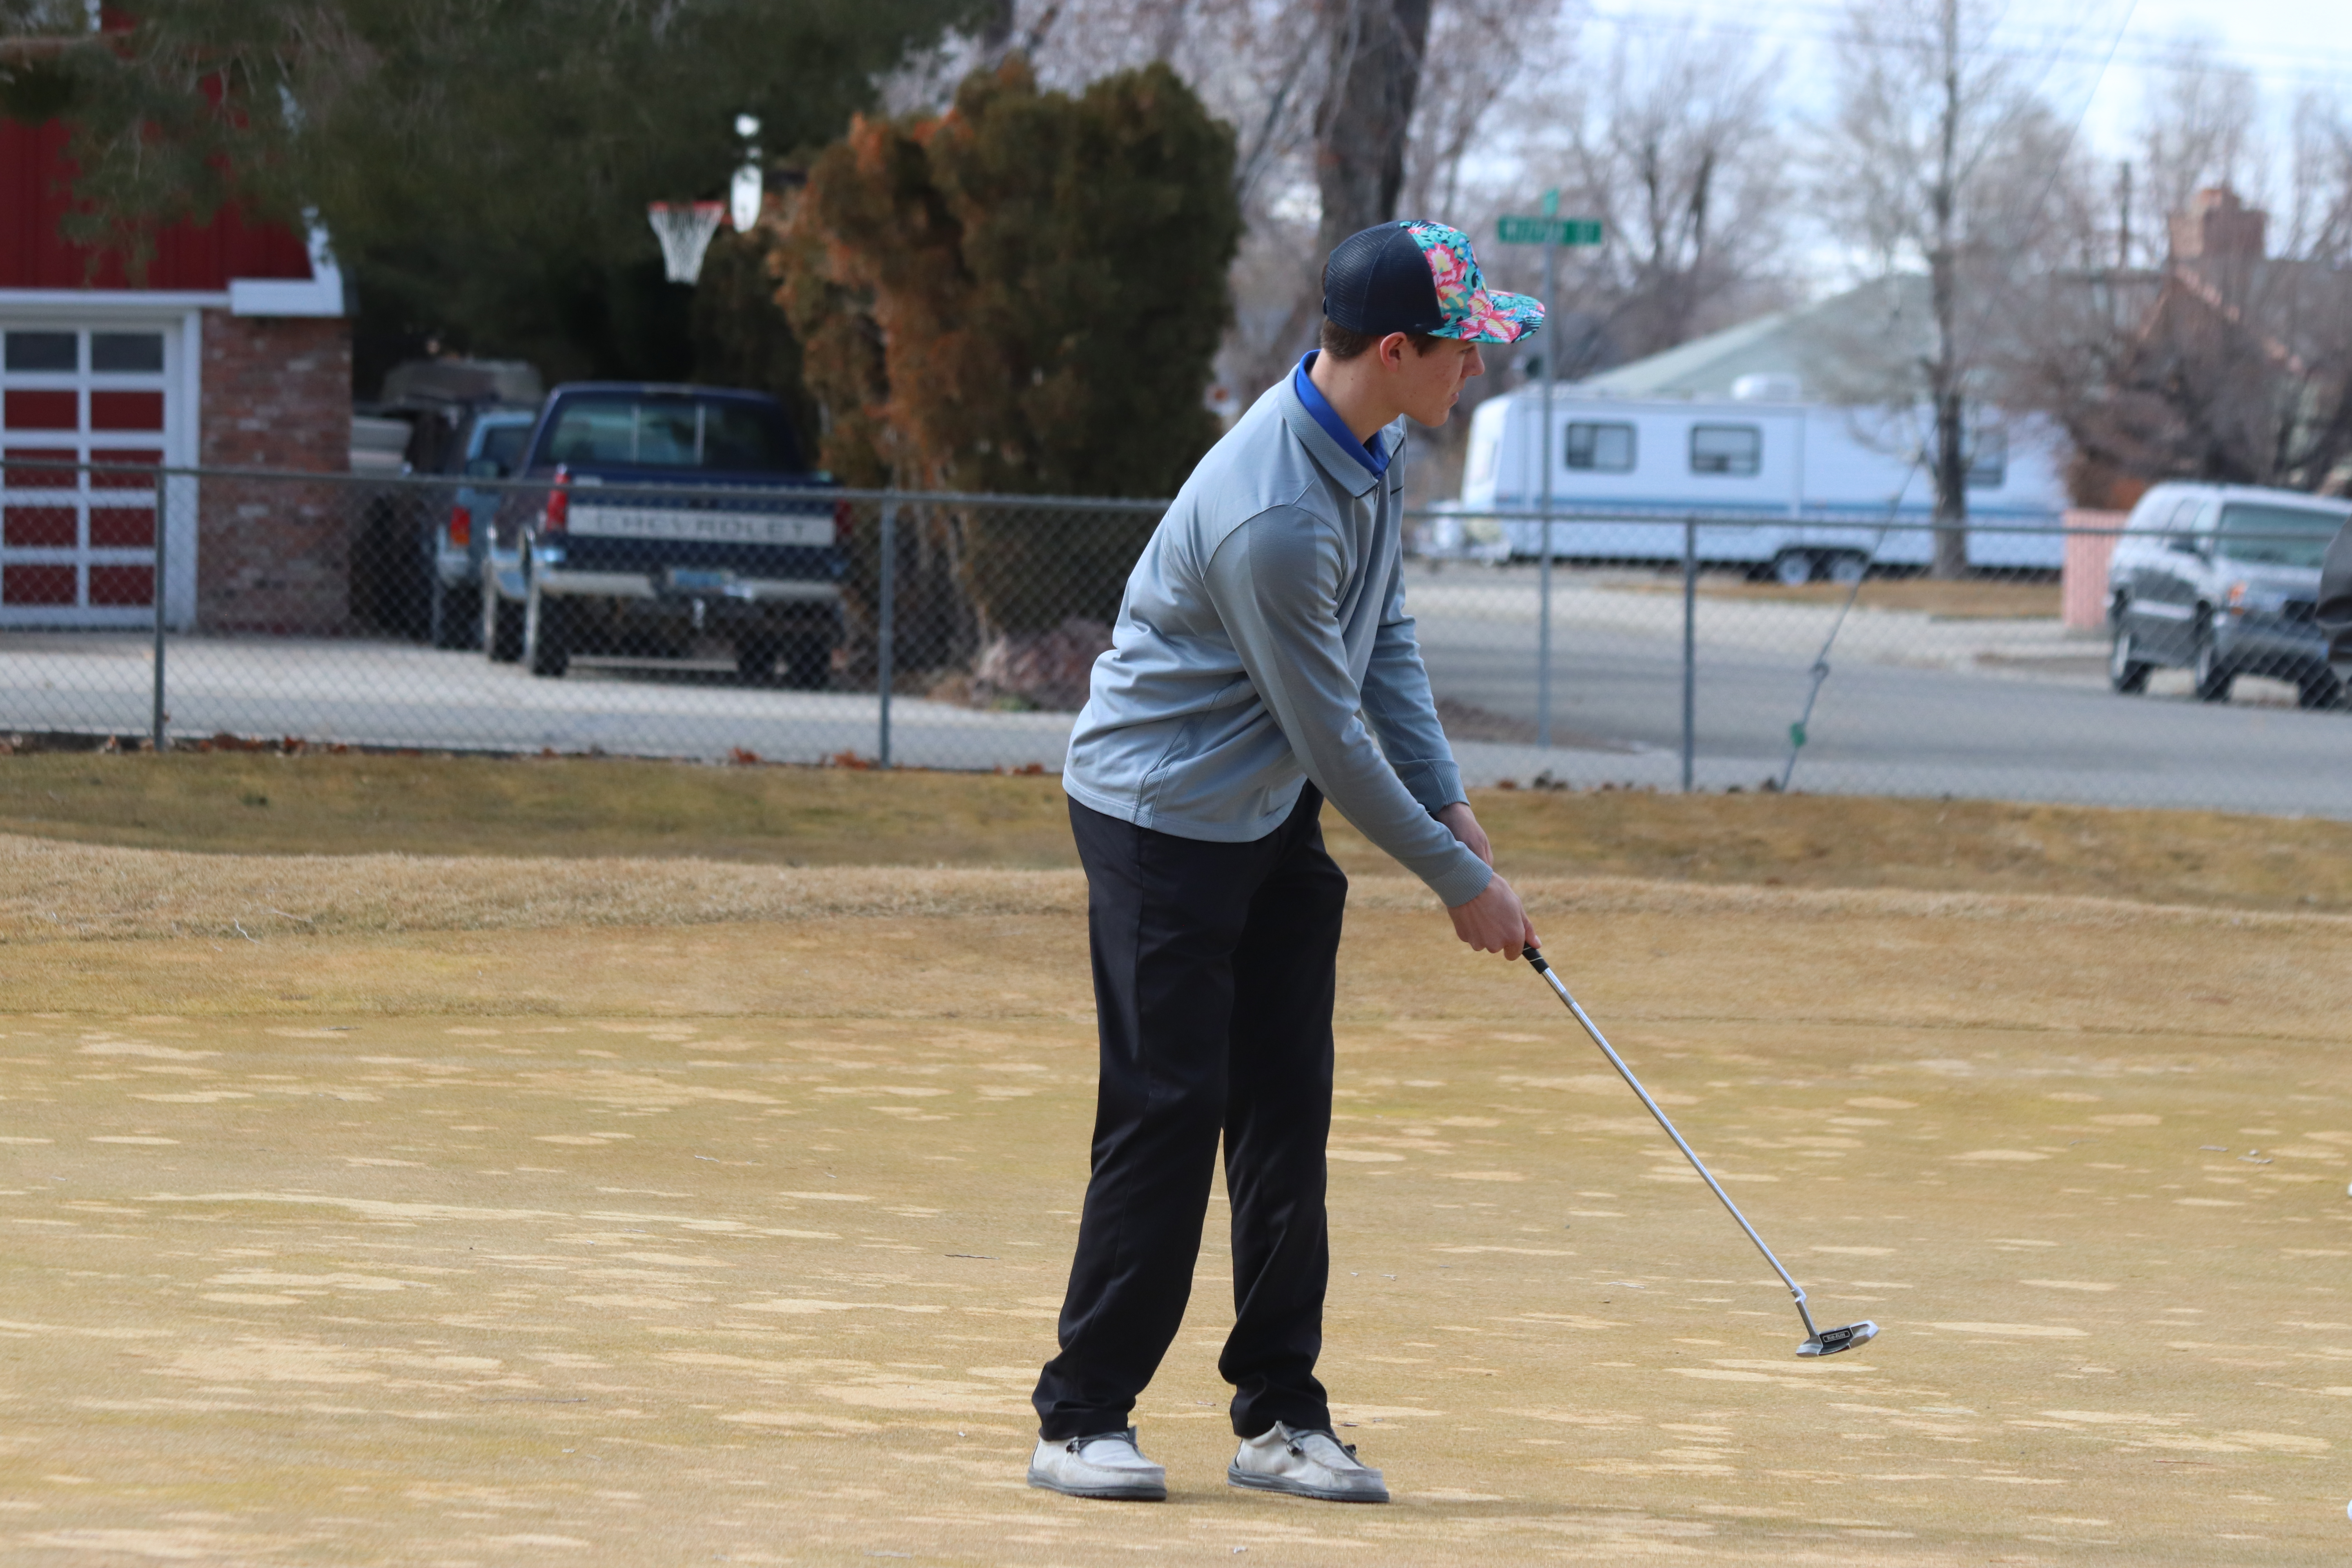 Student-Athlete of the Week Wade Mori and the golf team are back at it again